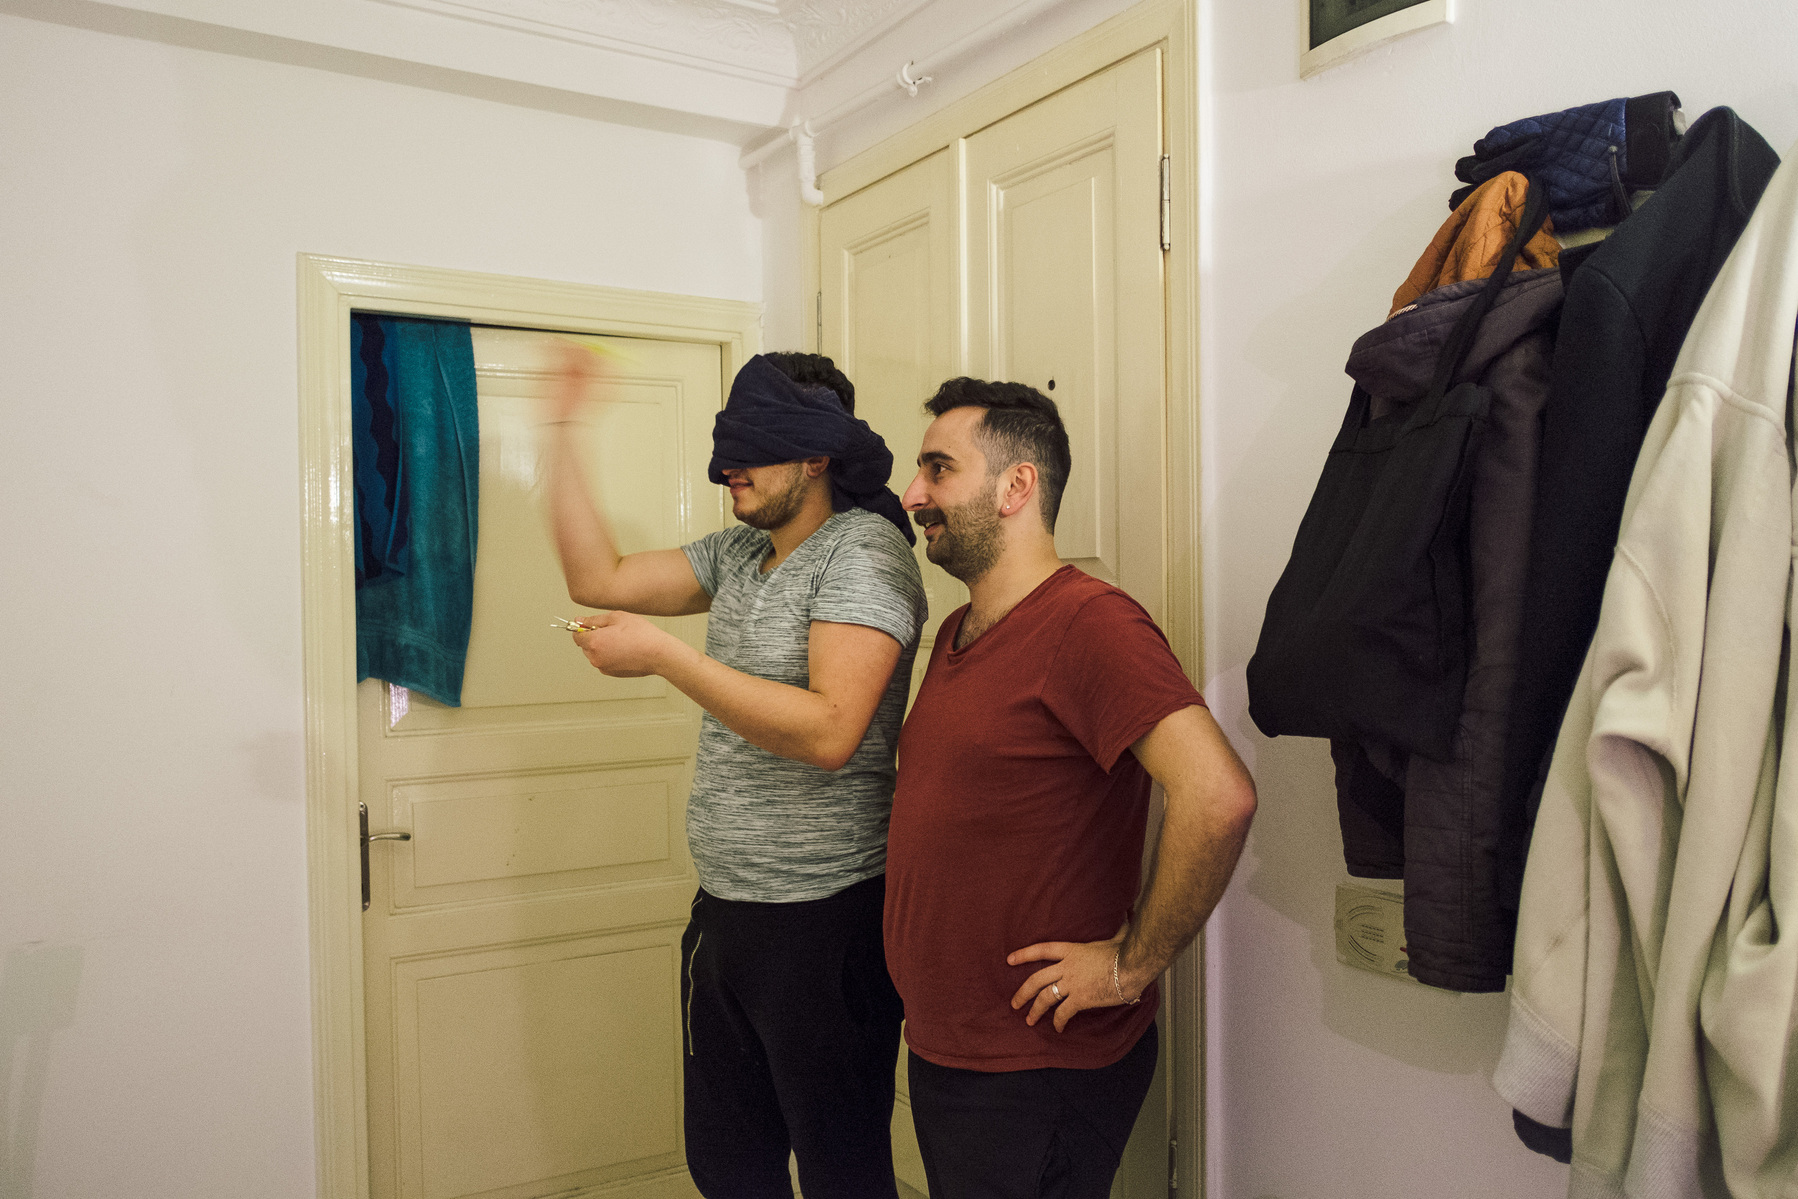 Syrian Gay Refugee Love Story Shot Between Istanbul Turkey And Norway Following A Couple Split